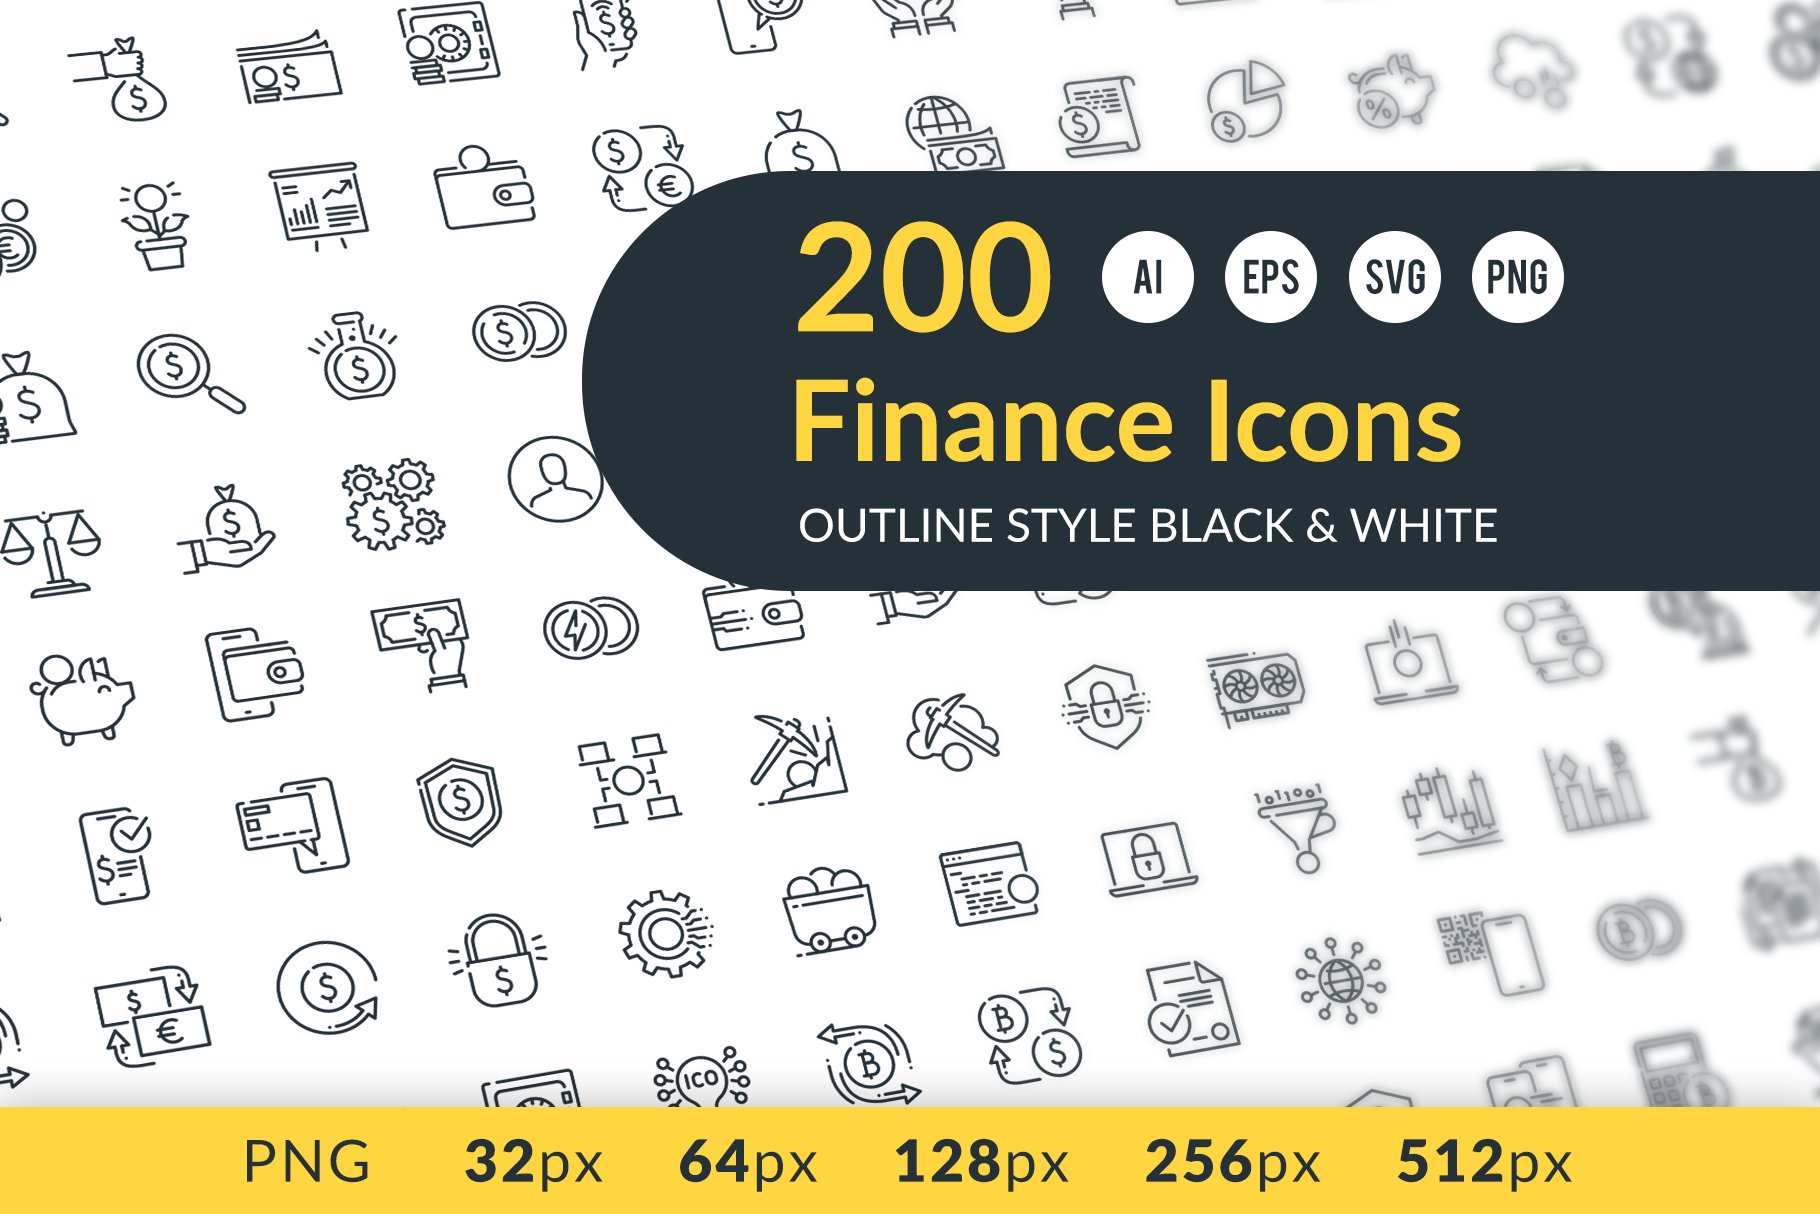 Finance Outline Icons cover image.